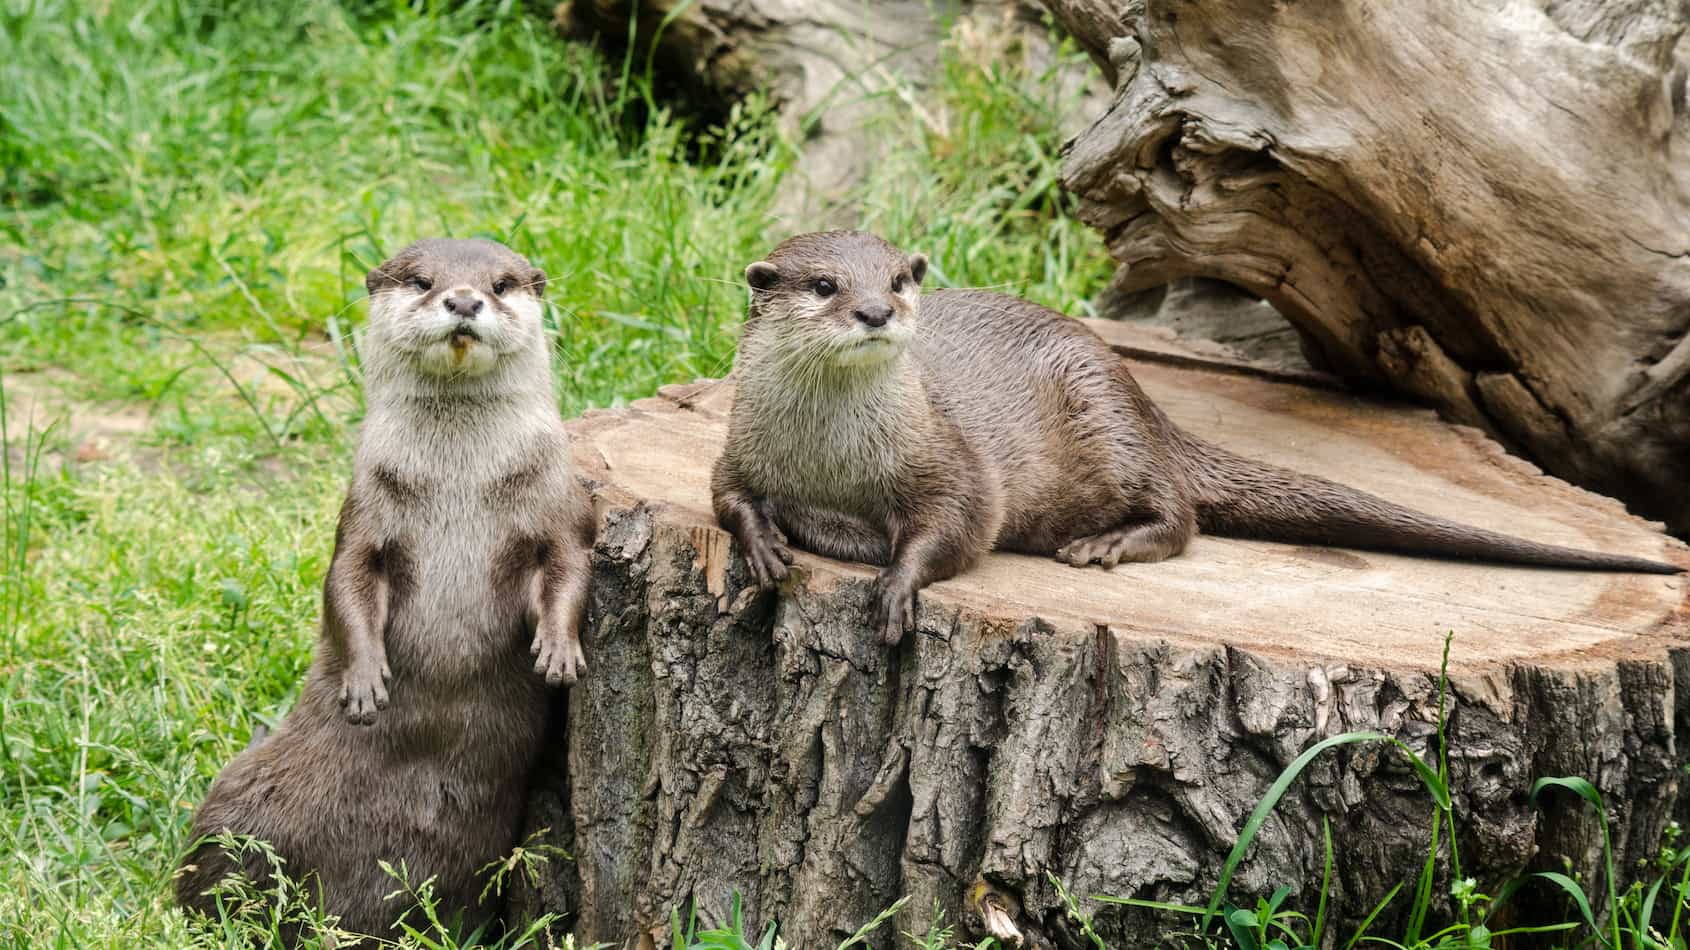 Otters as inspiration for redesigning the TraceTogether app